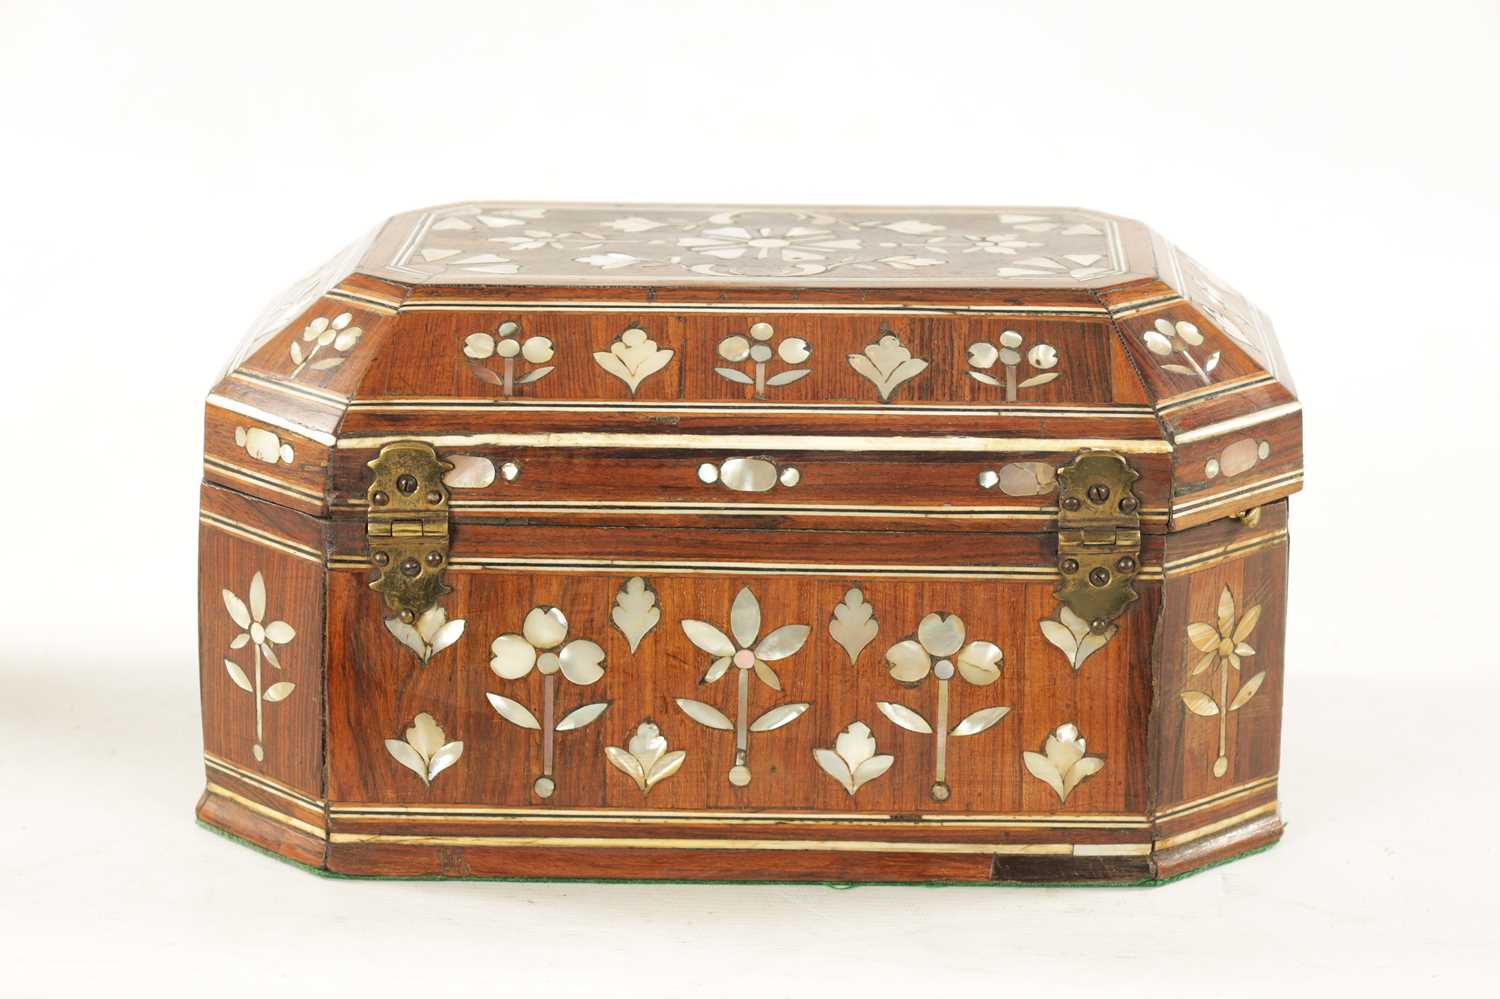 AN EARLY 18TH CENTURY SOUTH AMERICAN MOTHER OF PEARL INLAID BOX - Image 8 of 9